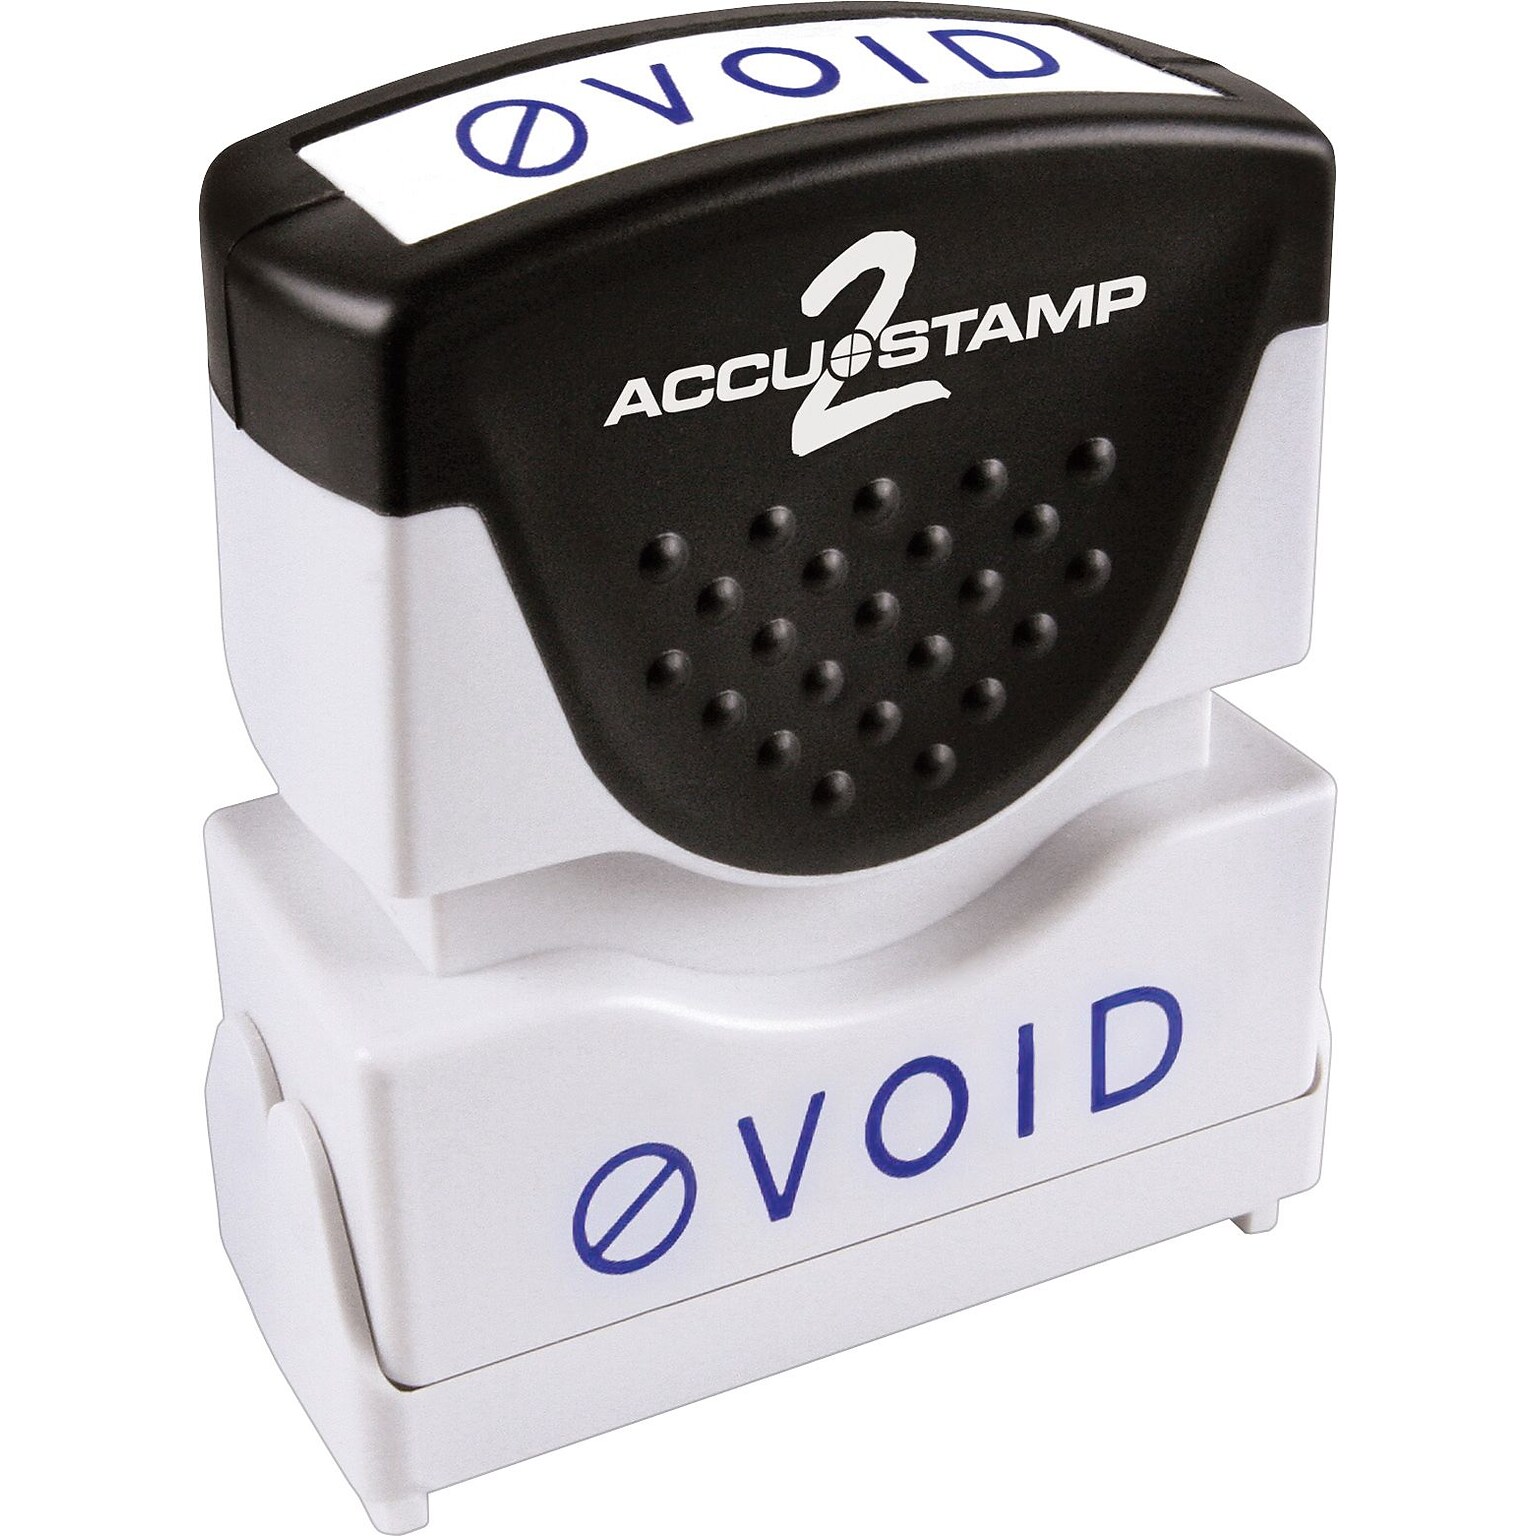 Accu-Stamp2 One-Color Pre-Inked Shutter Message Stamp, VOID, 1/2 x 1-5/8 Impression, Blue Ink (035584)